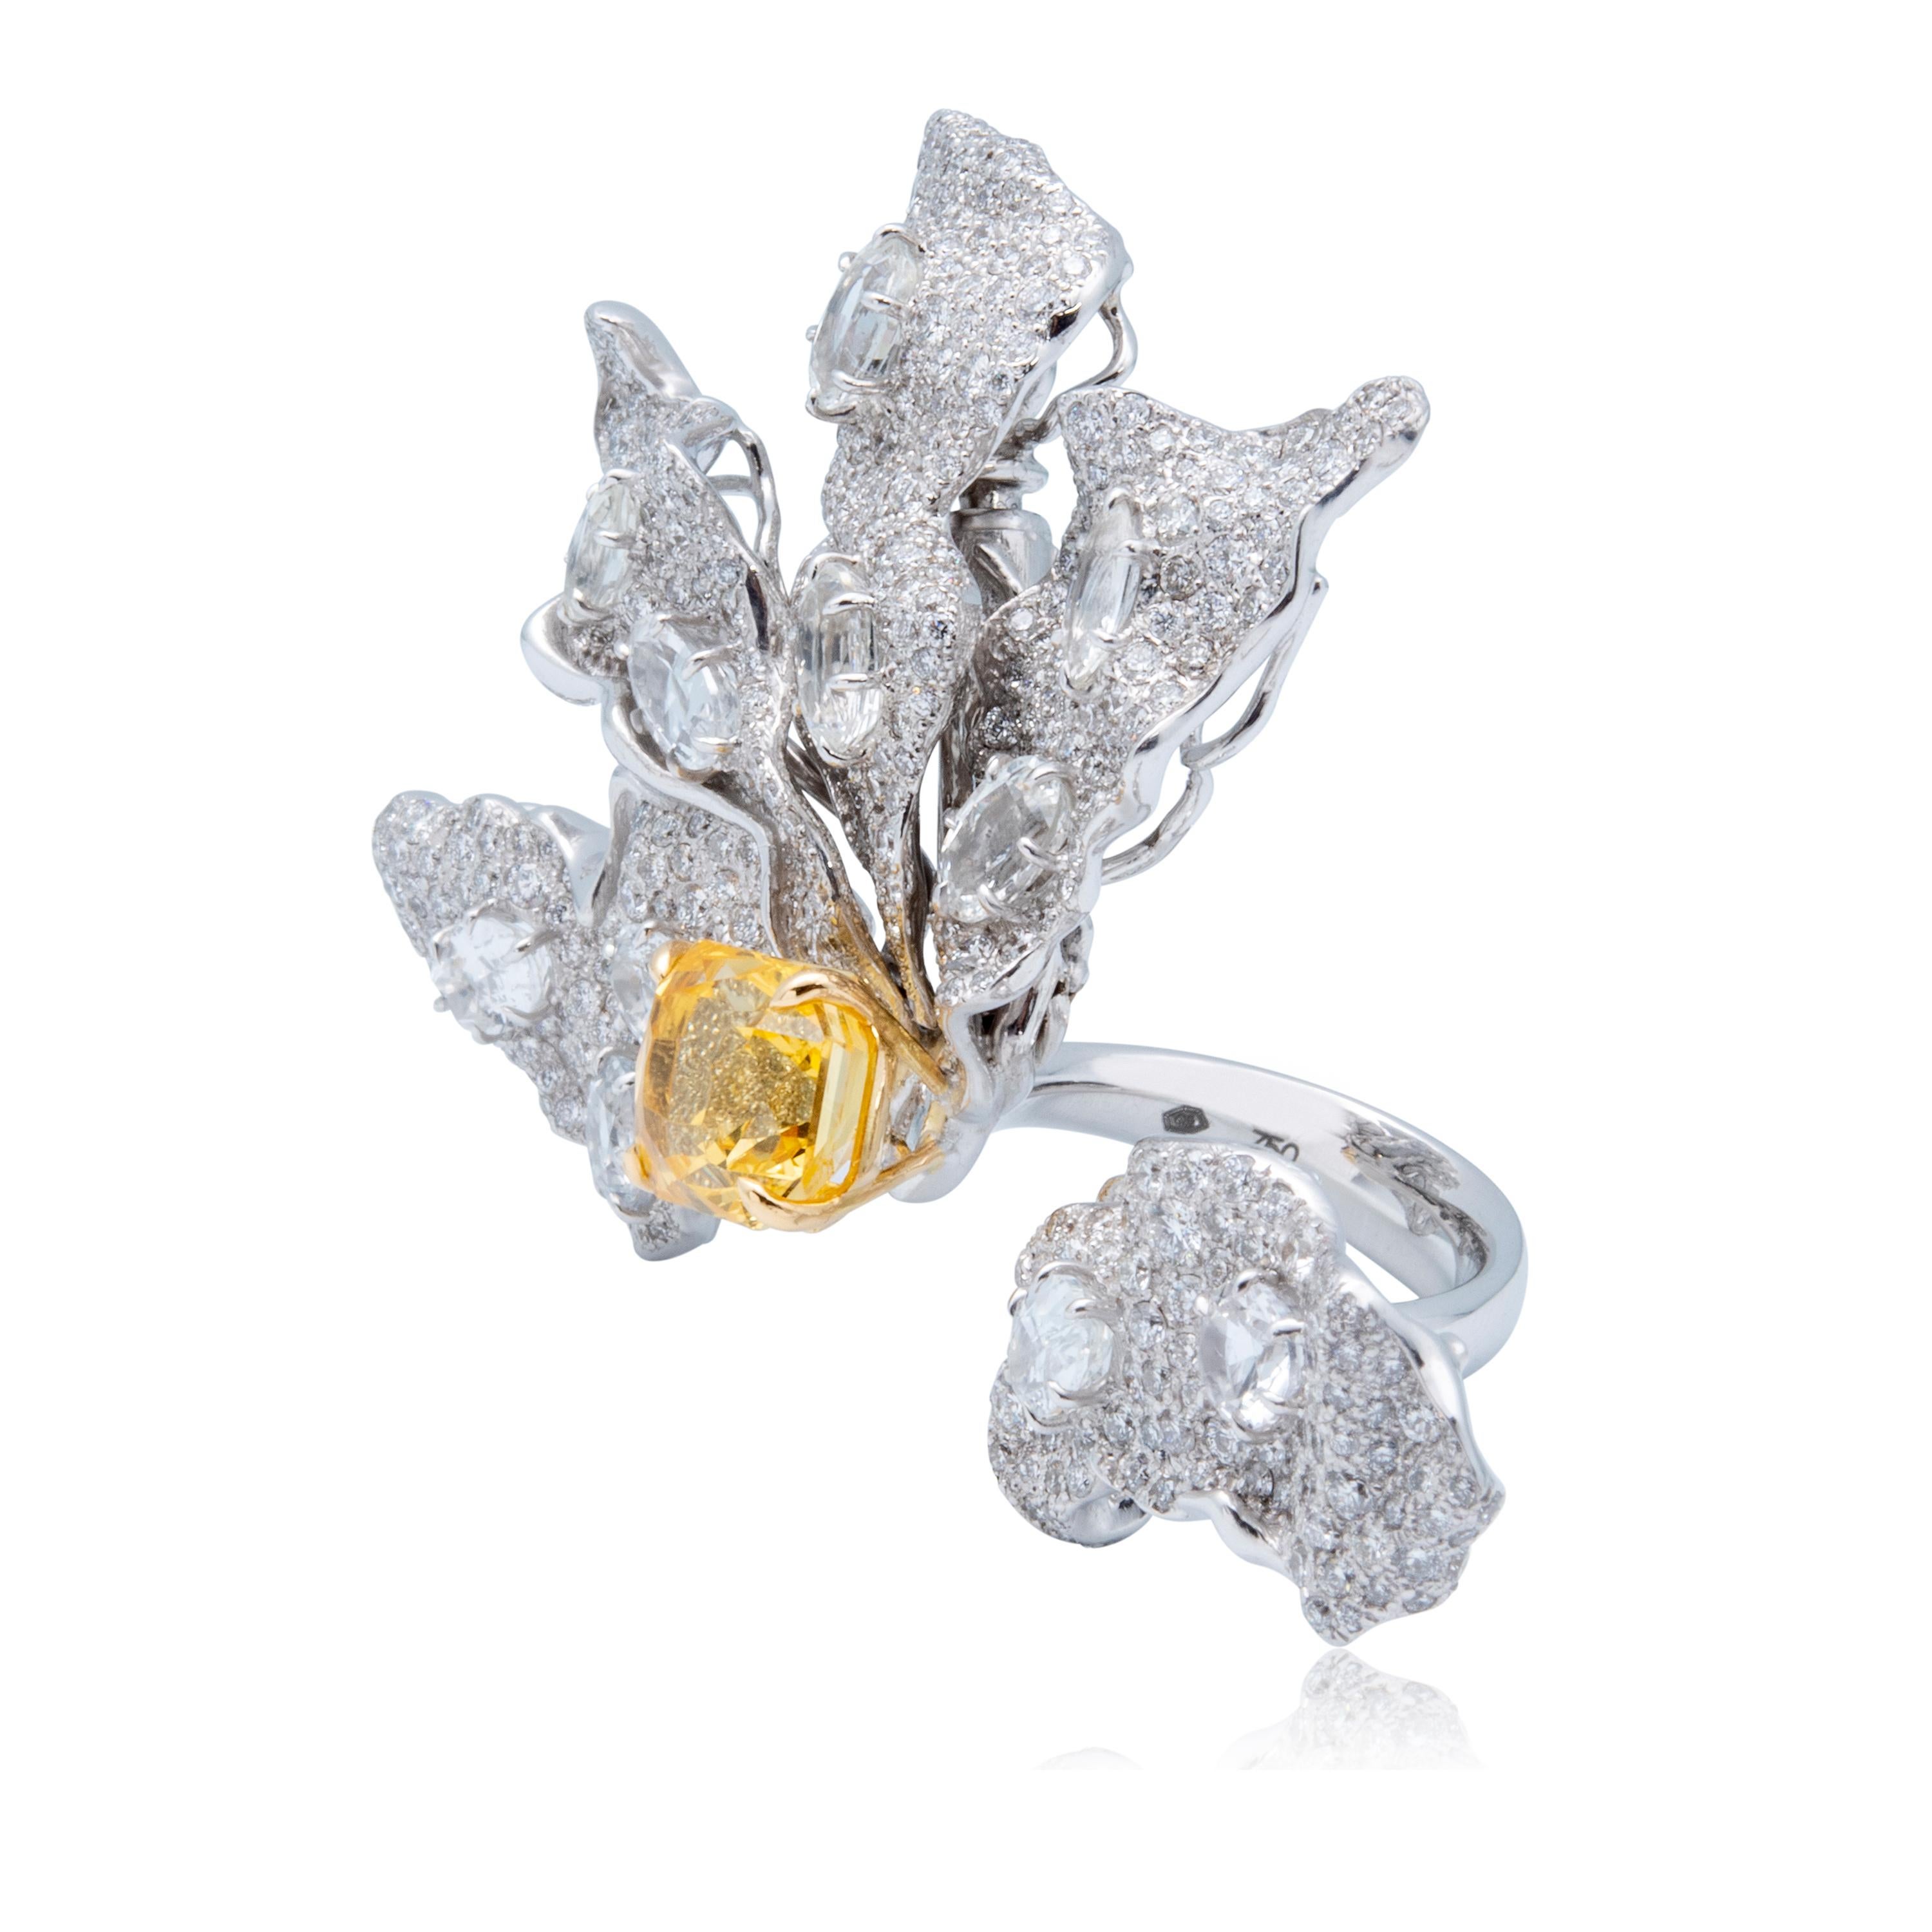 Collection: The Gem Made Me Do It

Title: “He Loves Me” Ring

This unheated yellow sapphire really wanted to be a daisy but not just any daisy.
It wanted to be the Super Luxe version of the “He loves me, He loves me not, He loves me…” daisy.
A